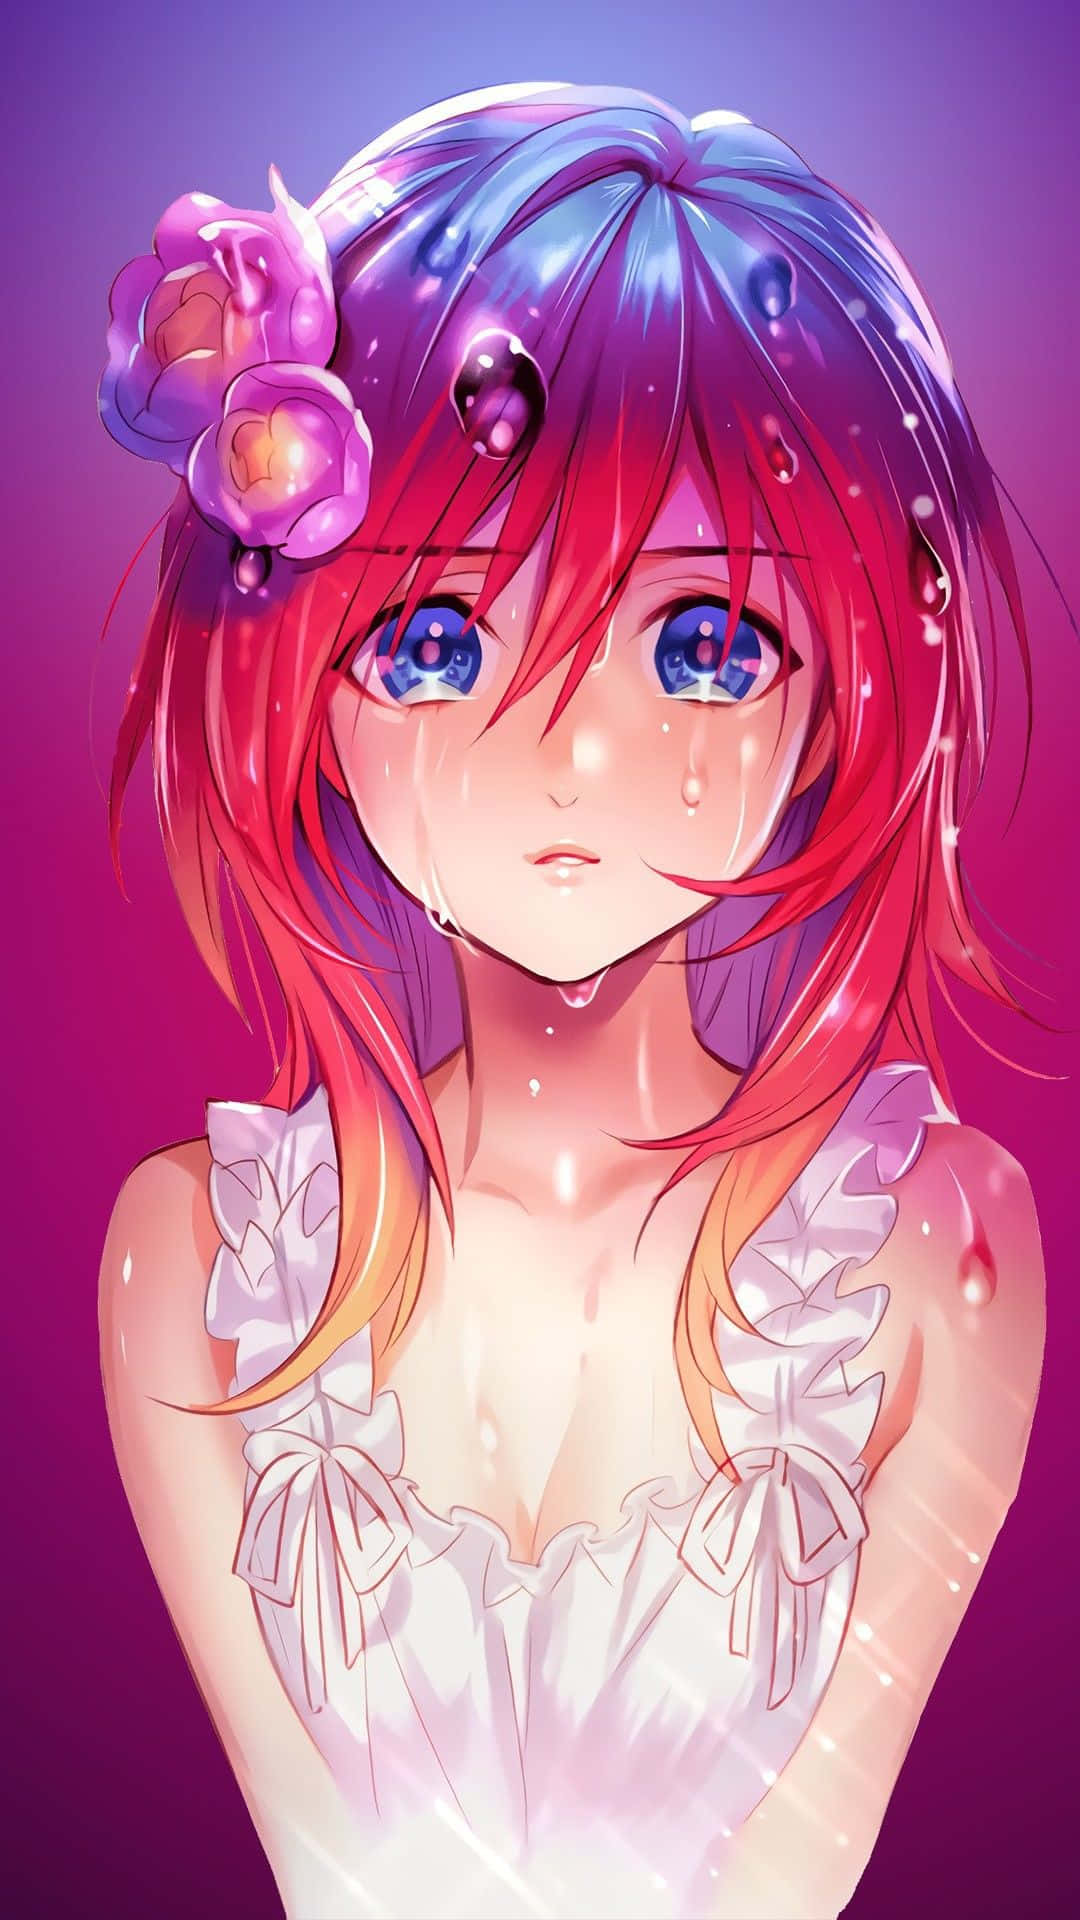 Fanart Anime Crying Wallpapers - Wallpaper Cave